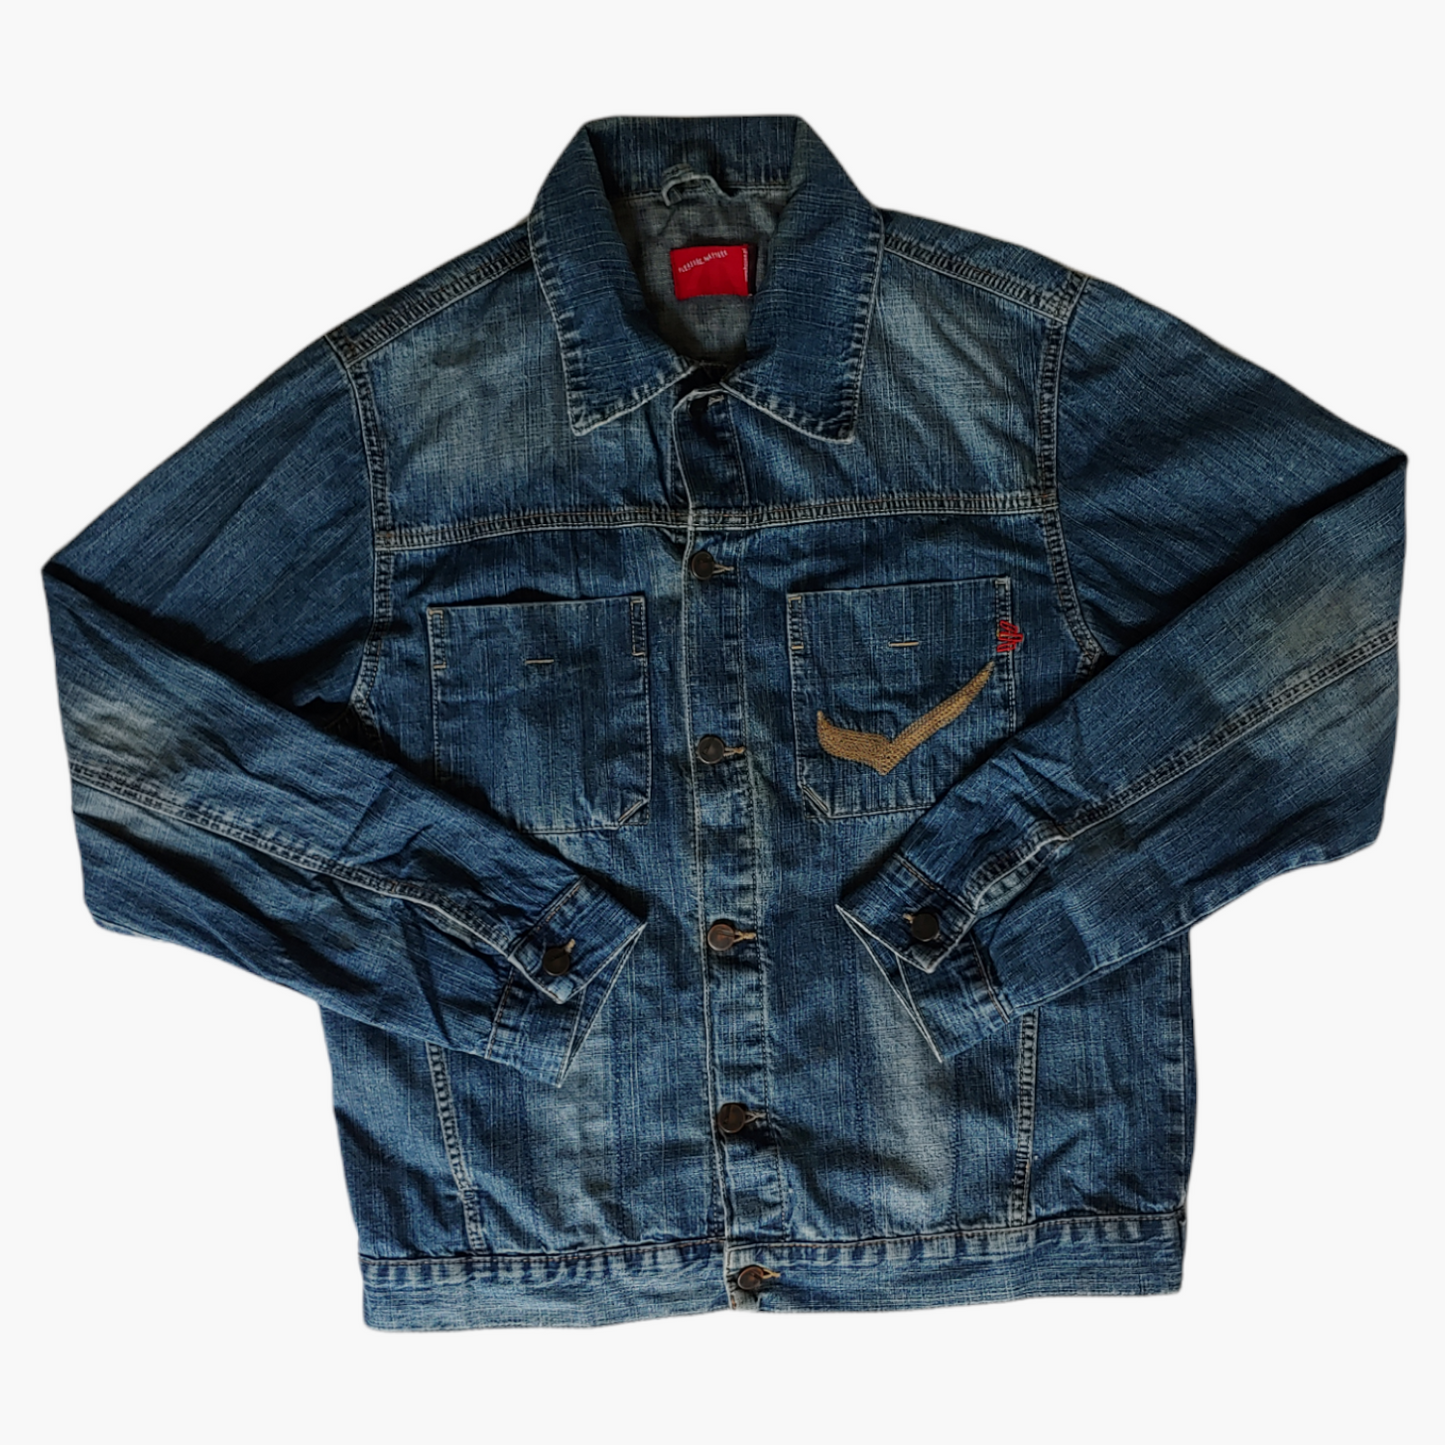 Vintage Y2K Pleasure Matters Denim Jacket With Embroidered Party Girls Drinking Back - Casspios Dream